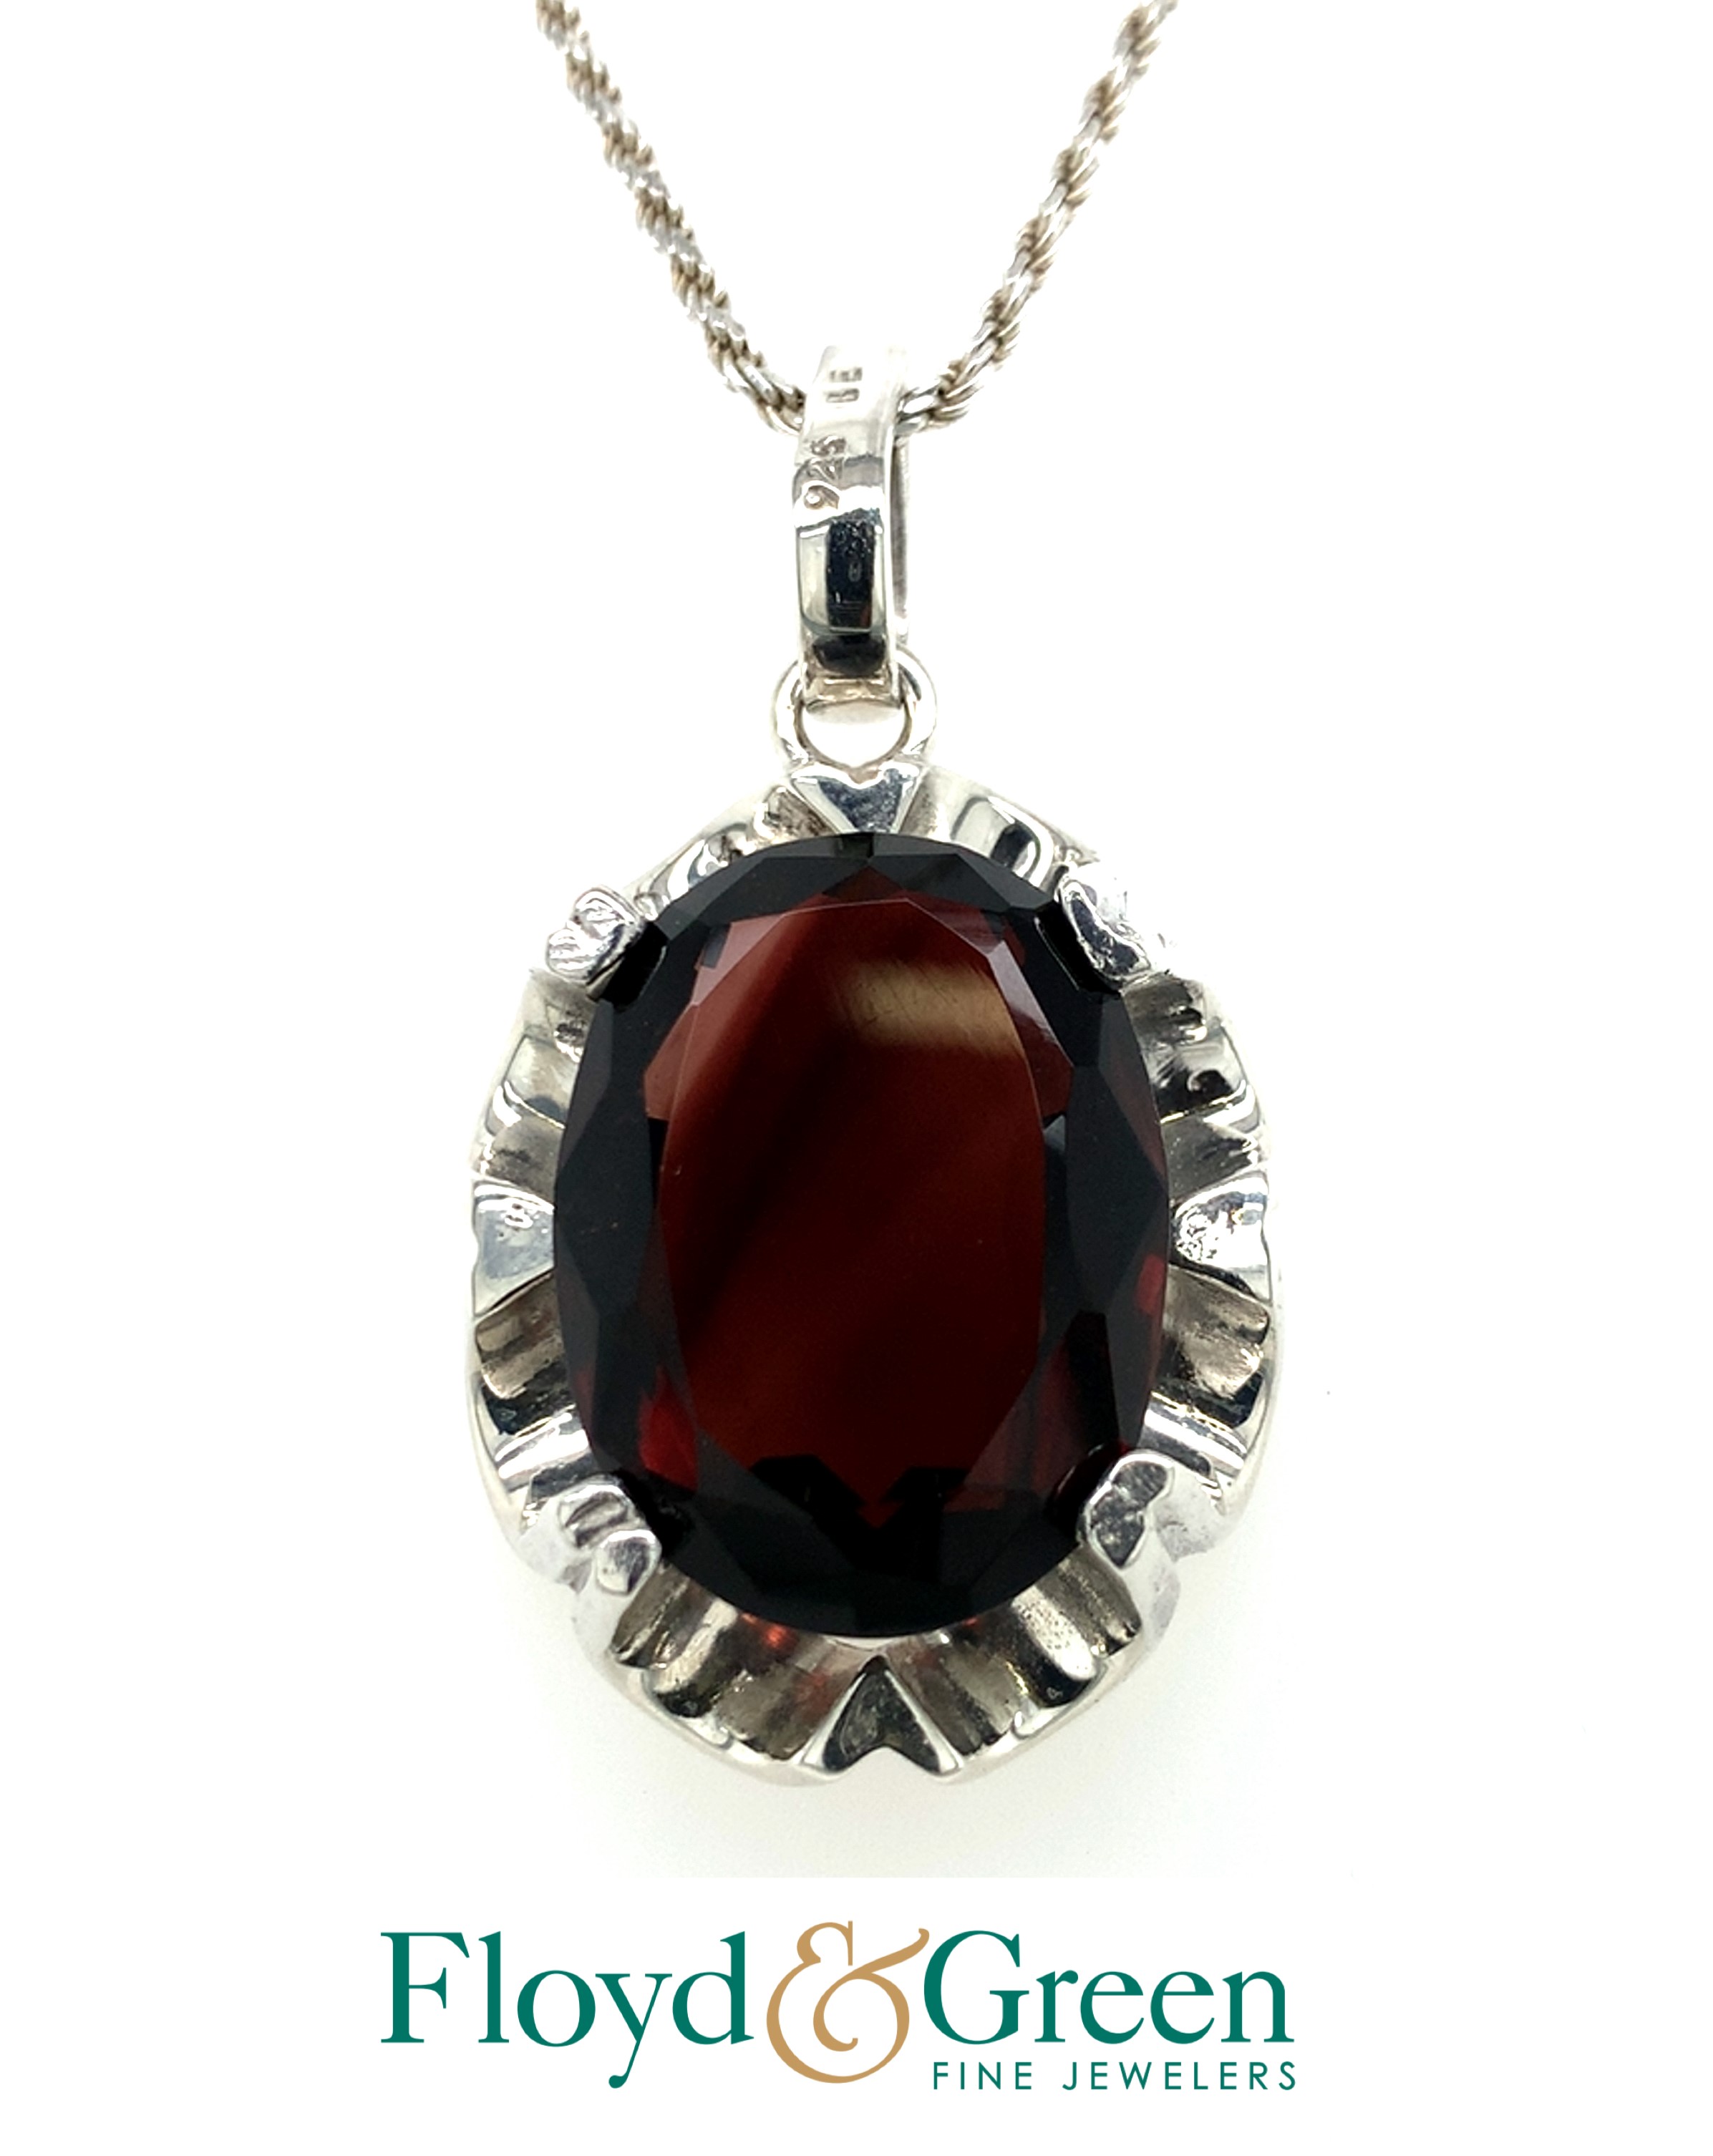 Sterling Silver Oval Dark Red Glass Pendant, 13.5g, on a Sterling Silver Rope Chain, 36 inch, 10.7g